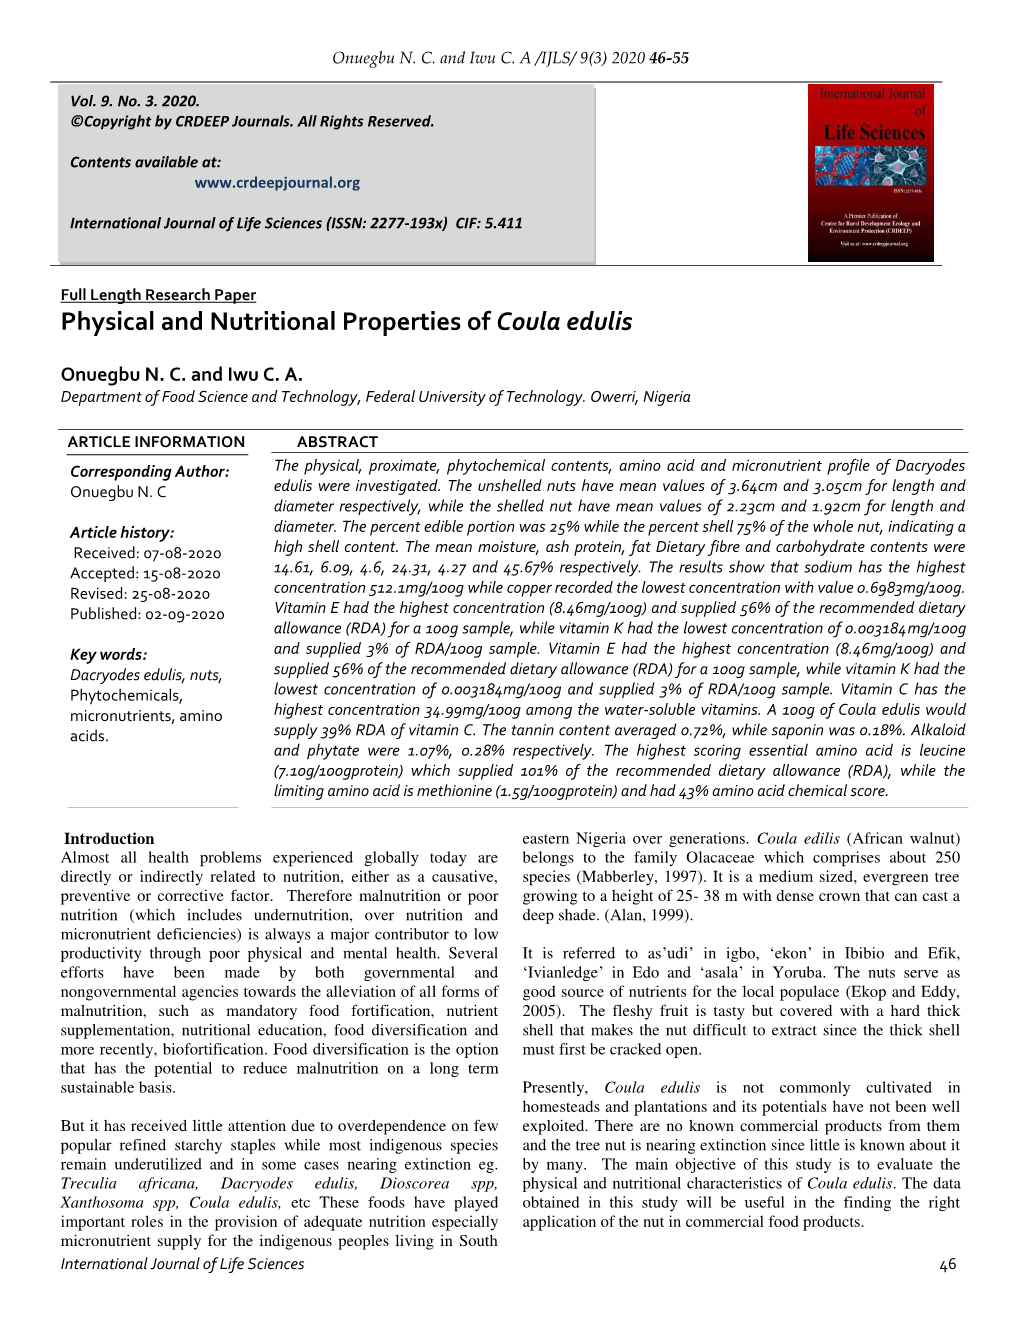 Physical and Nutritional Properties of Coula Edulis